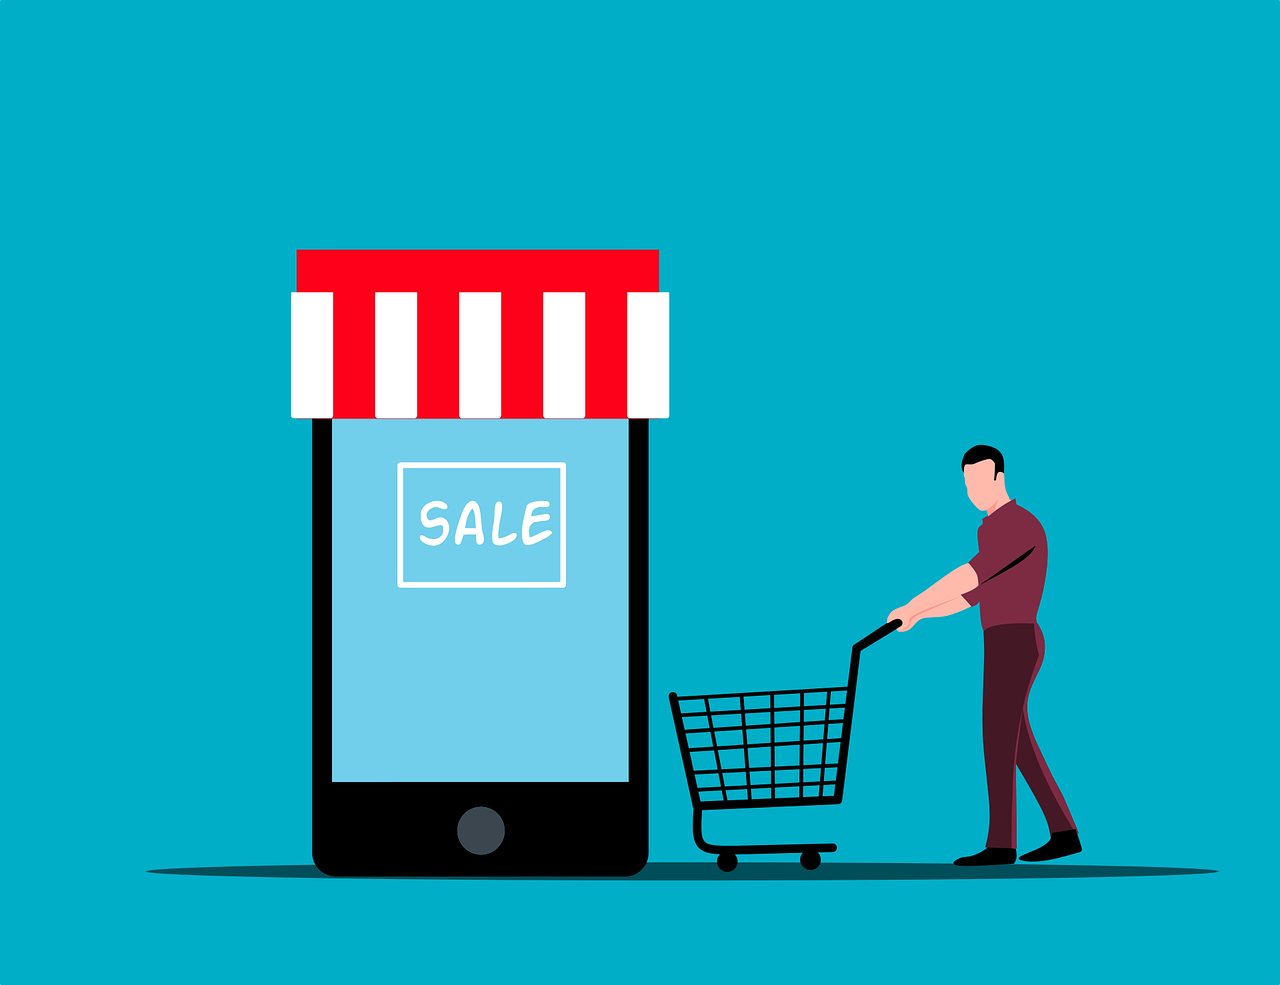 a man pushing a shopping cart next to a phone, an illustration of, sales, digital concept art illustration, image on the store website, with a blue background